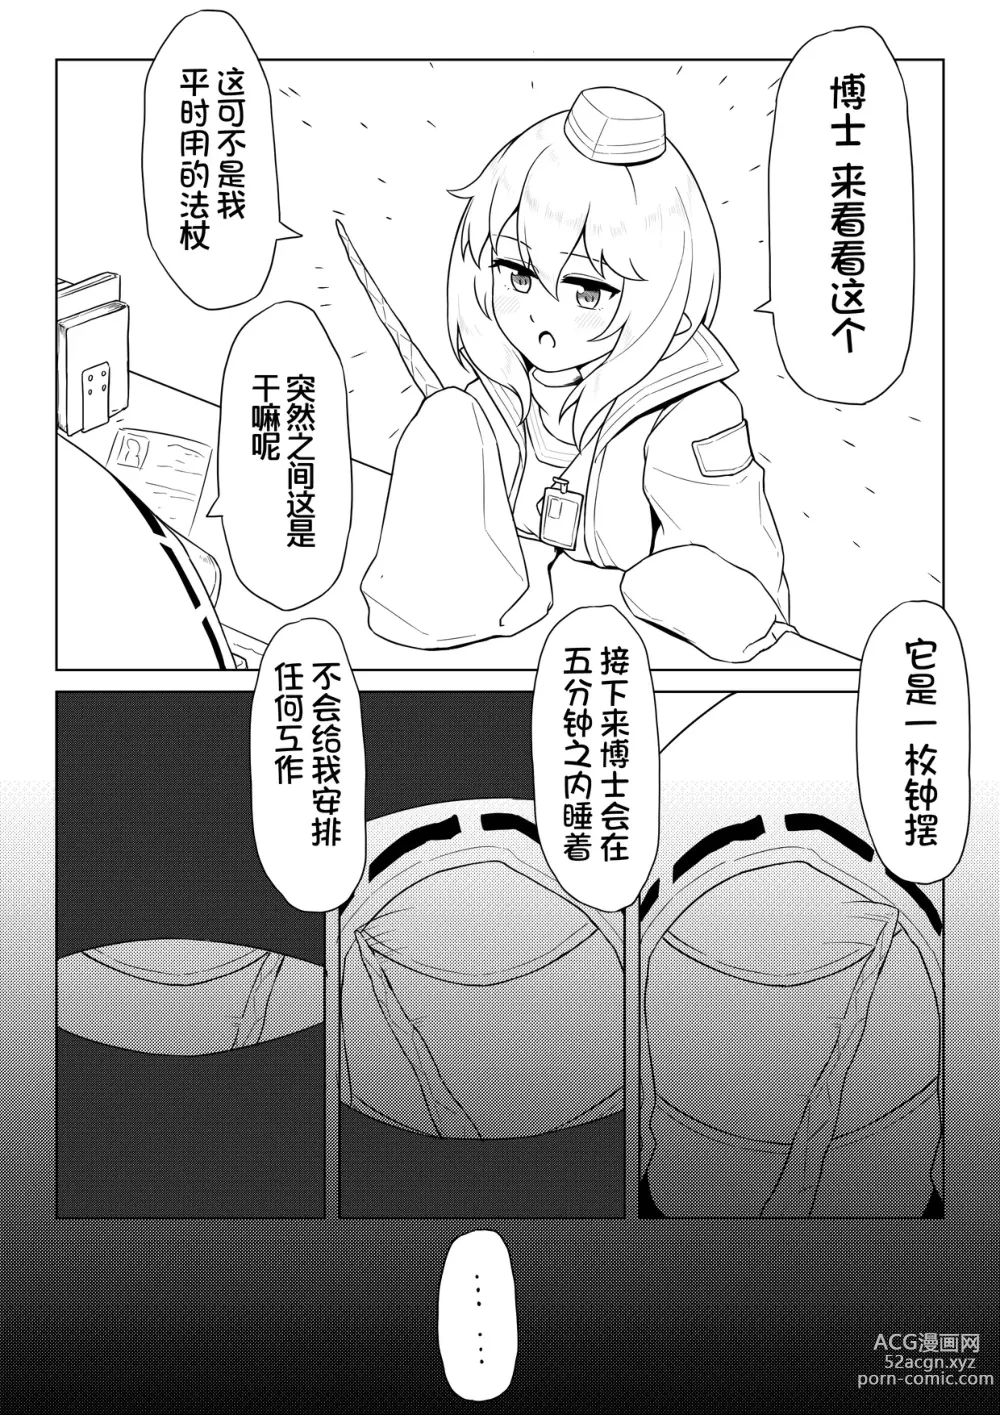 Page 3 of doujinshi Durins Self-hypnosis (decensored)